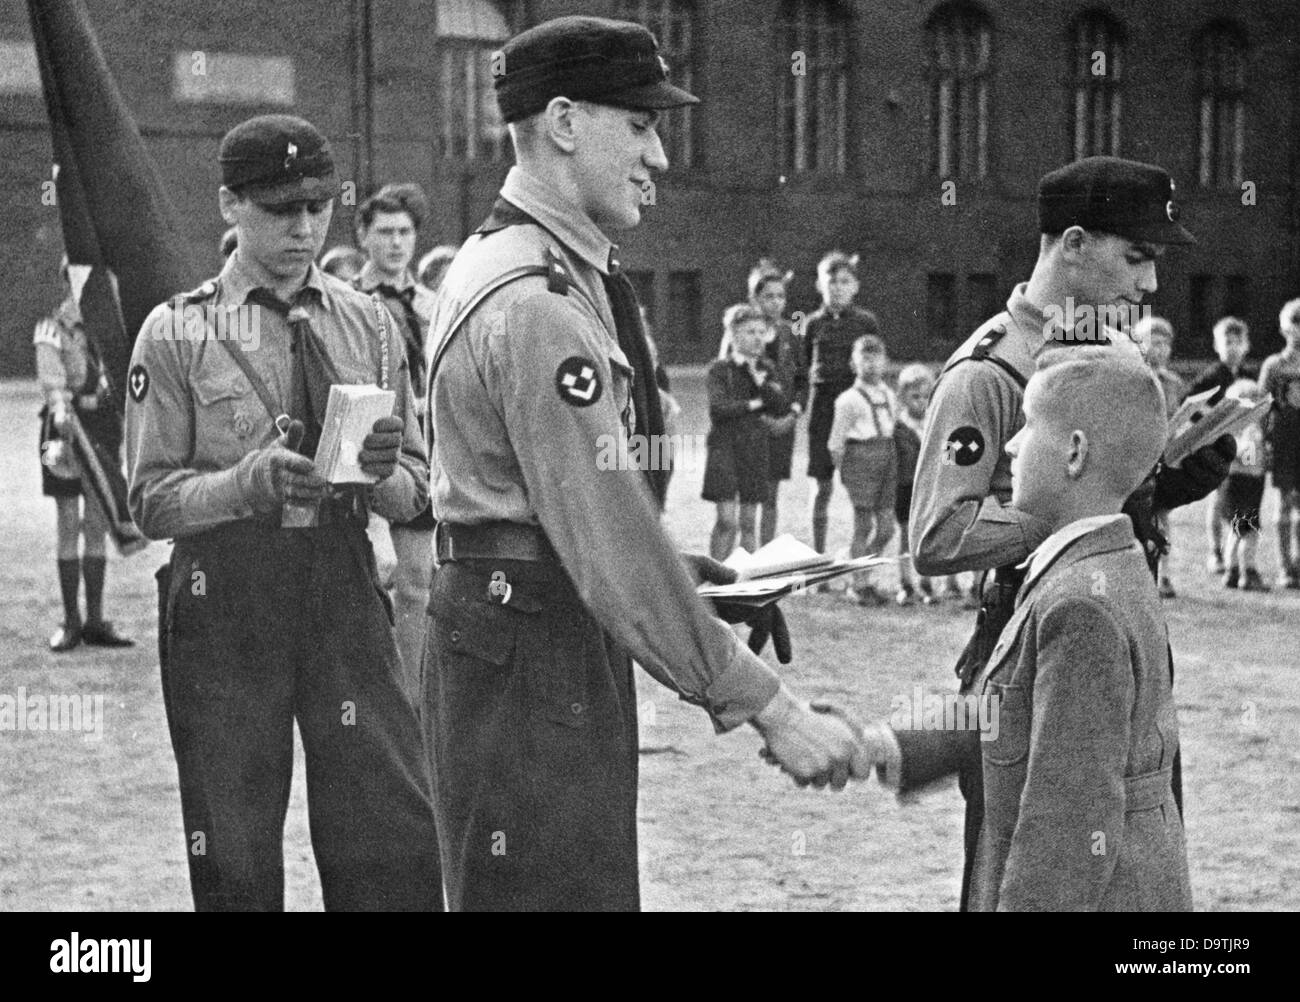 A ten-year-old boy is admitted to the German Youth, the youth organization of the Hitler Youth (DJ) for 10 to 14-year-old boys, on 19 April 1943, in Berlin. Fotoarchiv für Zeitgeschichte Stock Photo